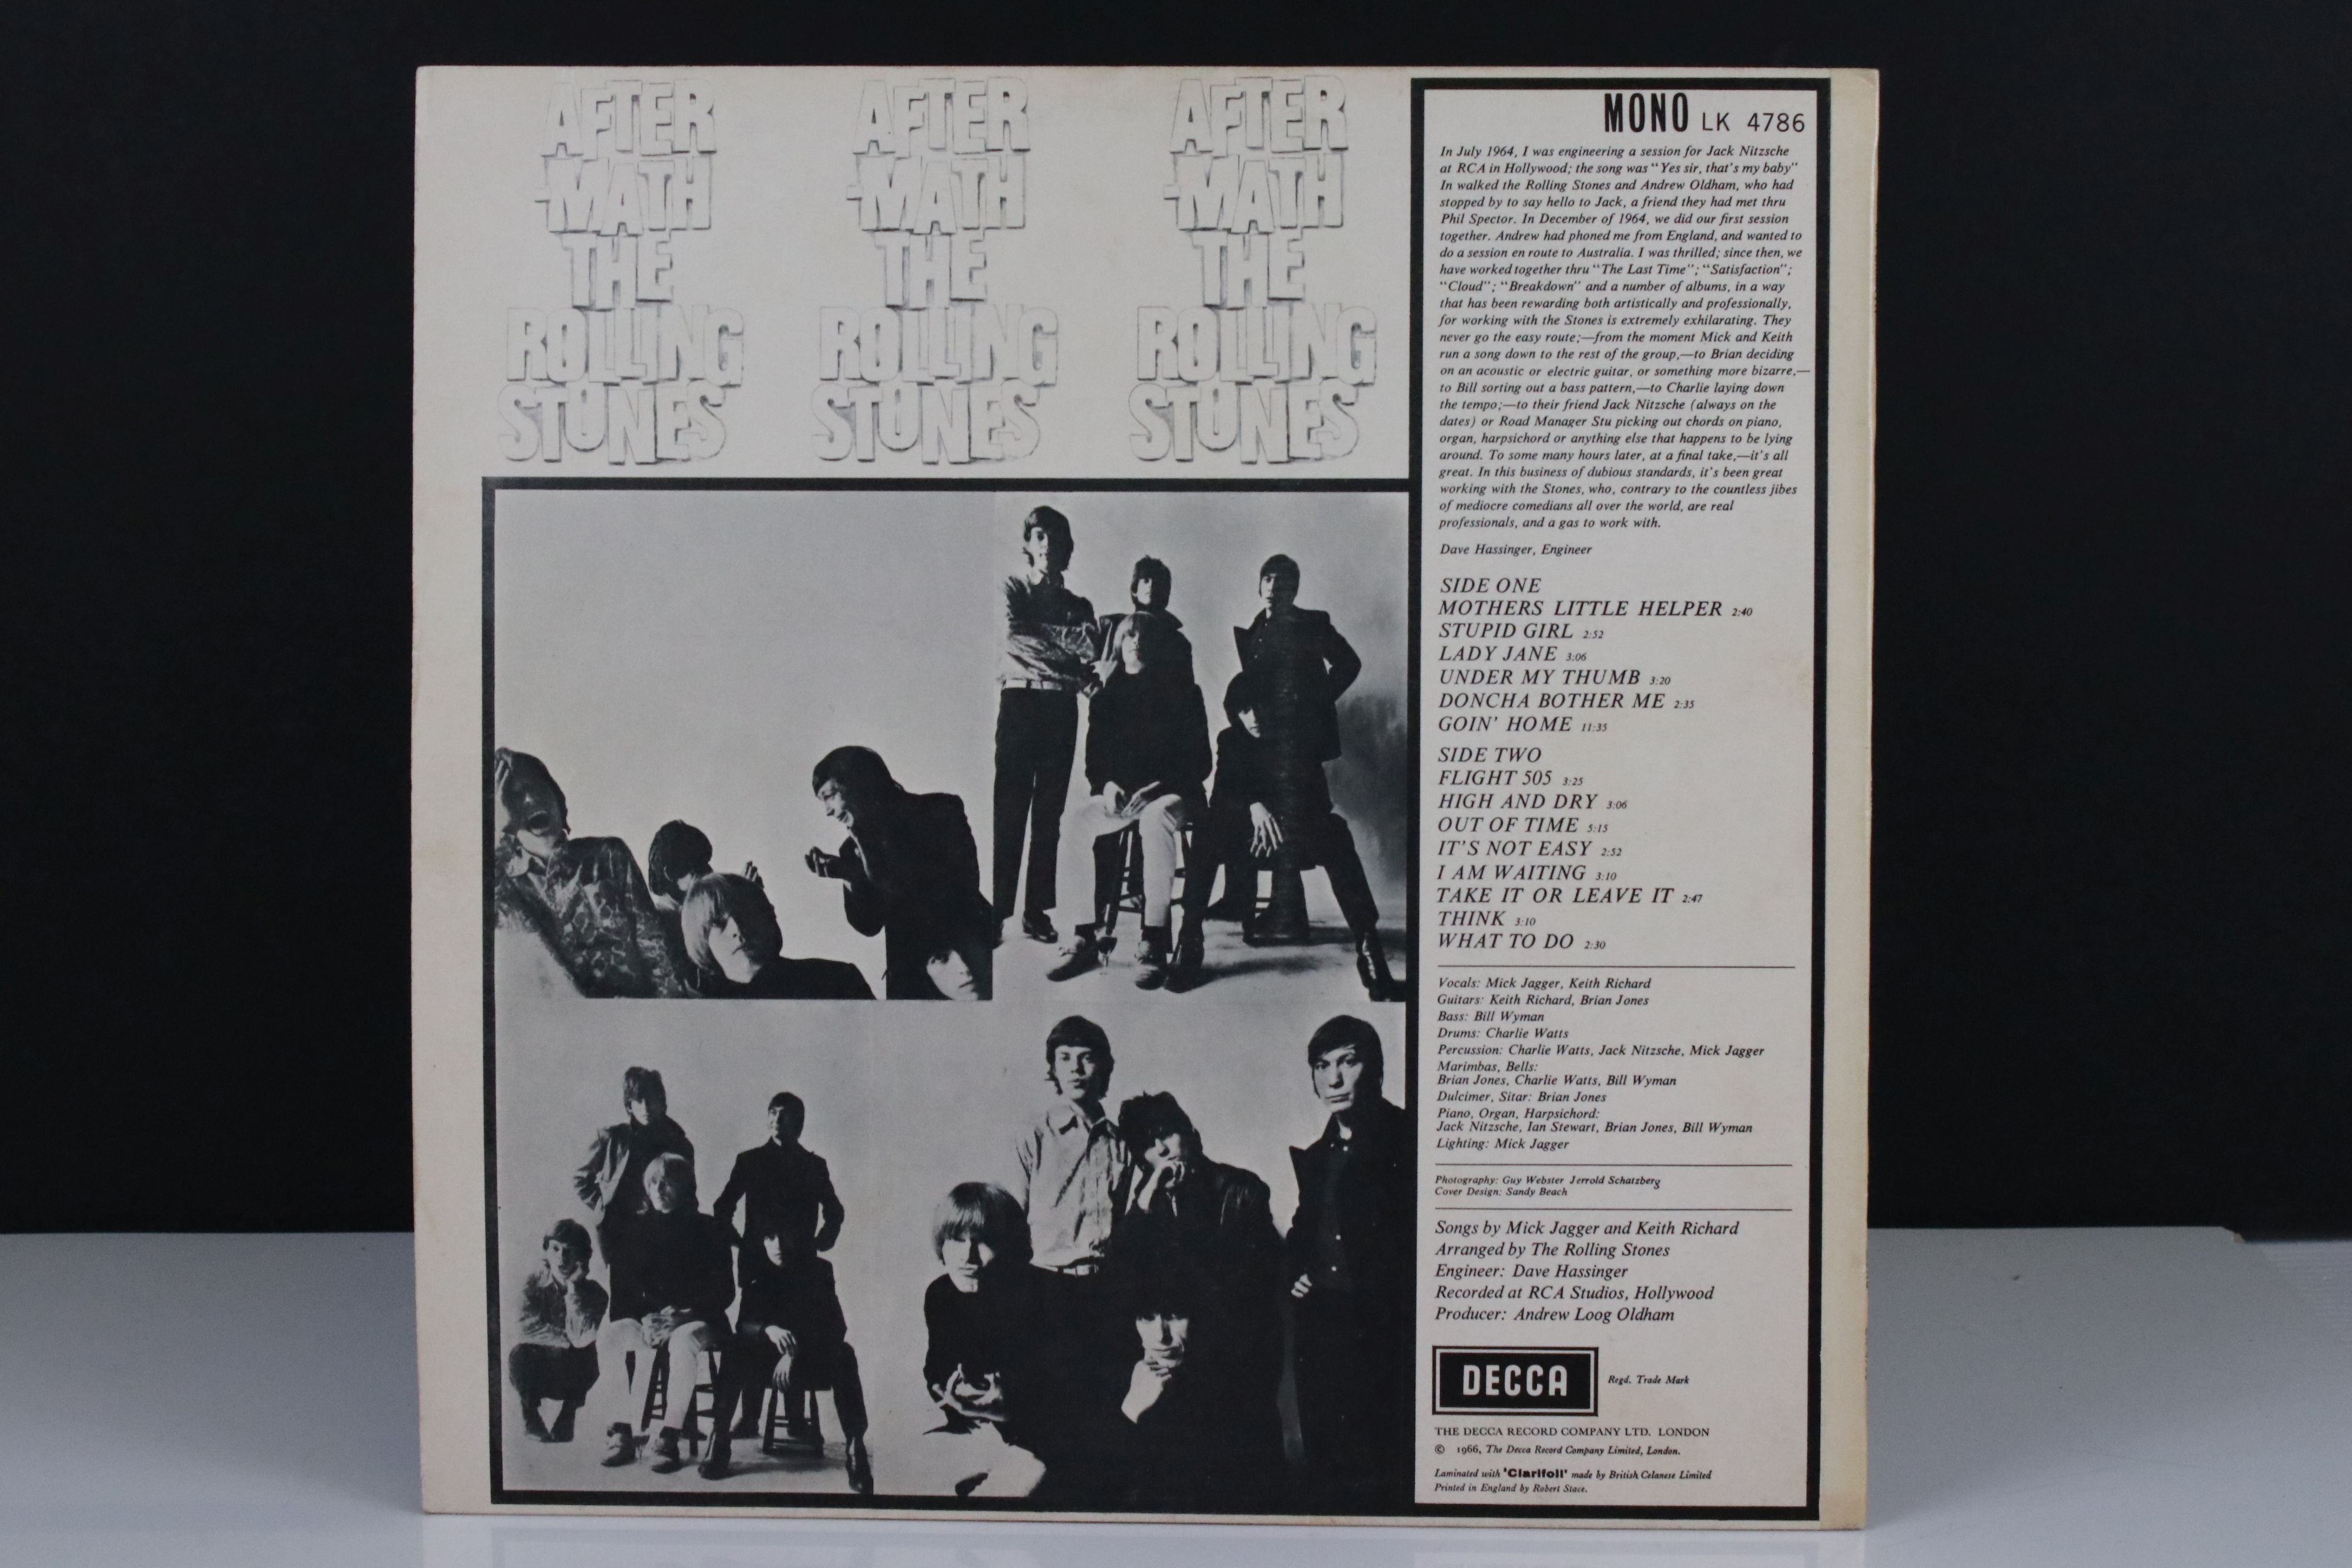 Vinyl - The Rolling Stones Aftermath (Decca LK 4786) mono, nice early copy. Sleeve and Vinyl VG+ - Image 4 of 4